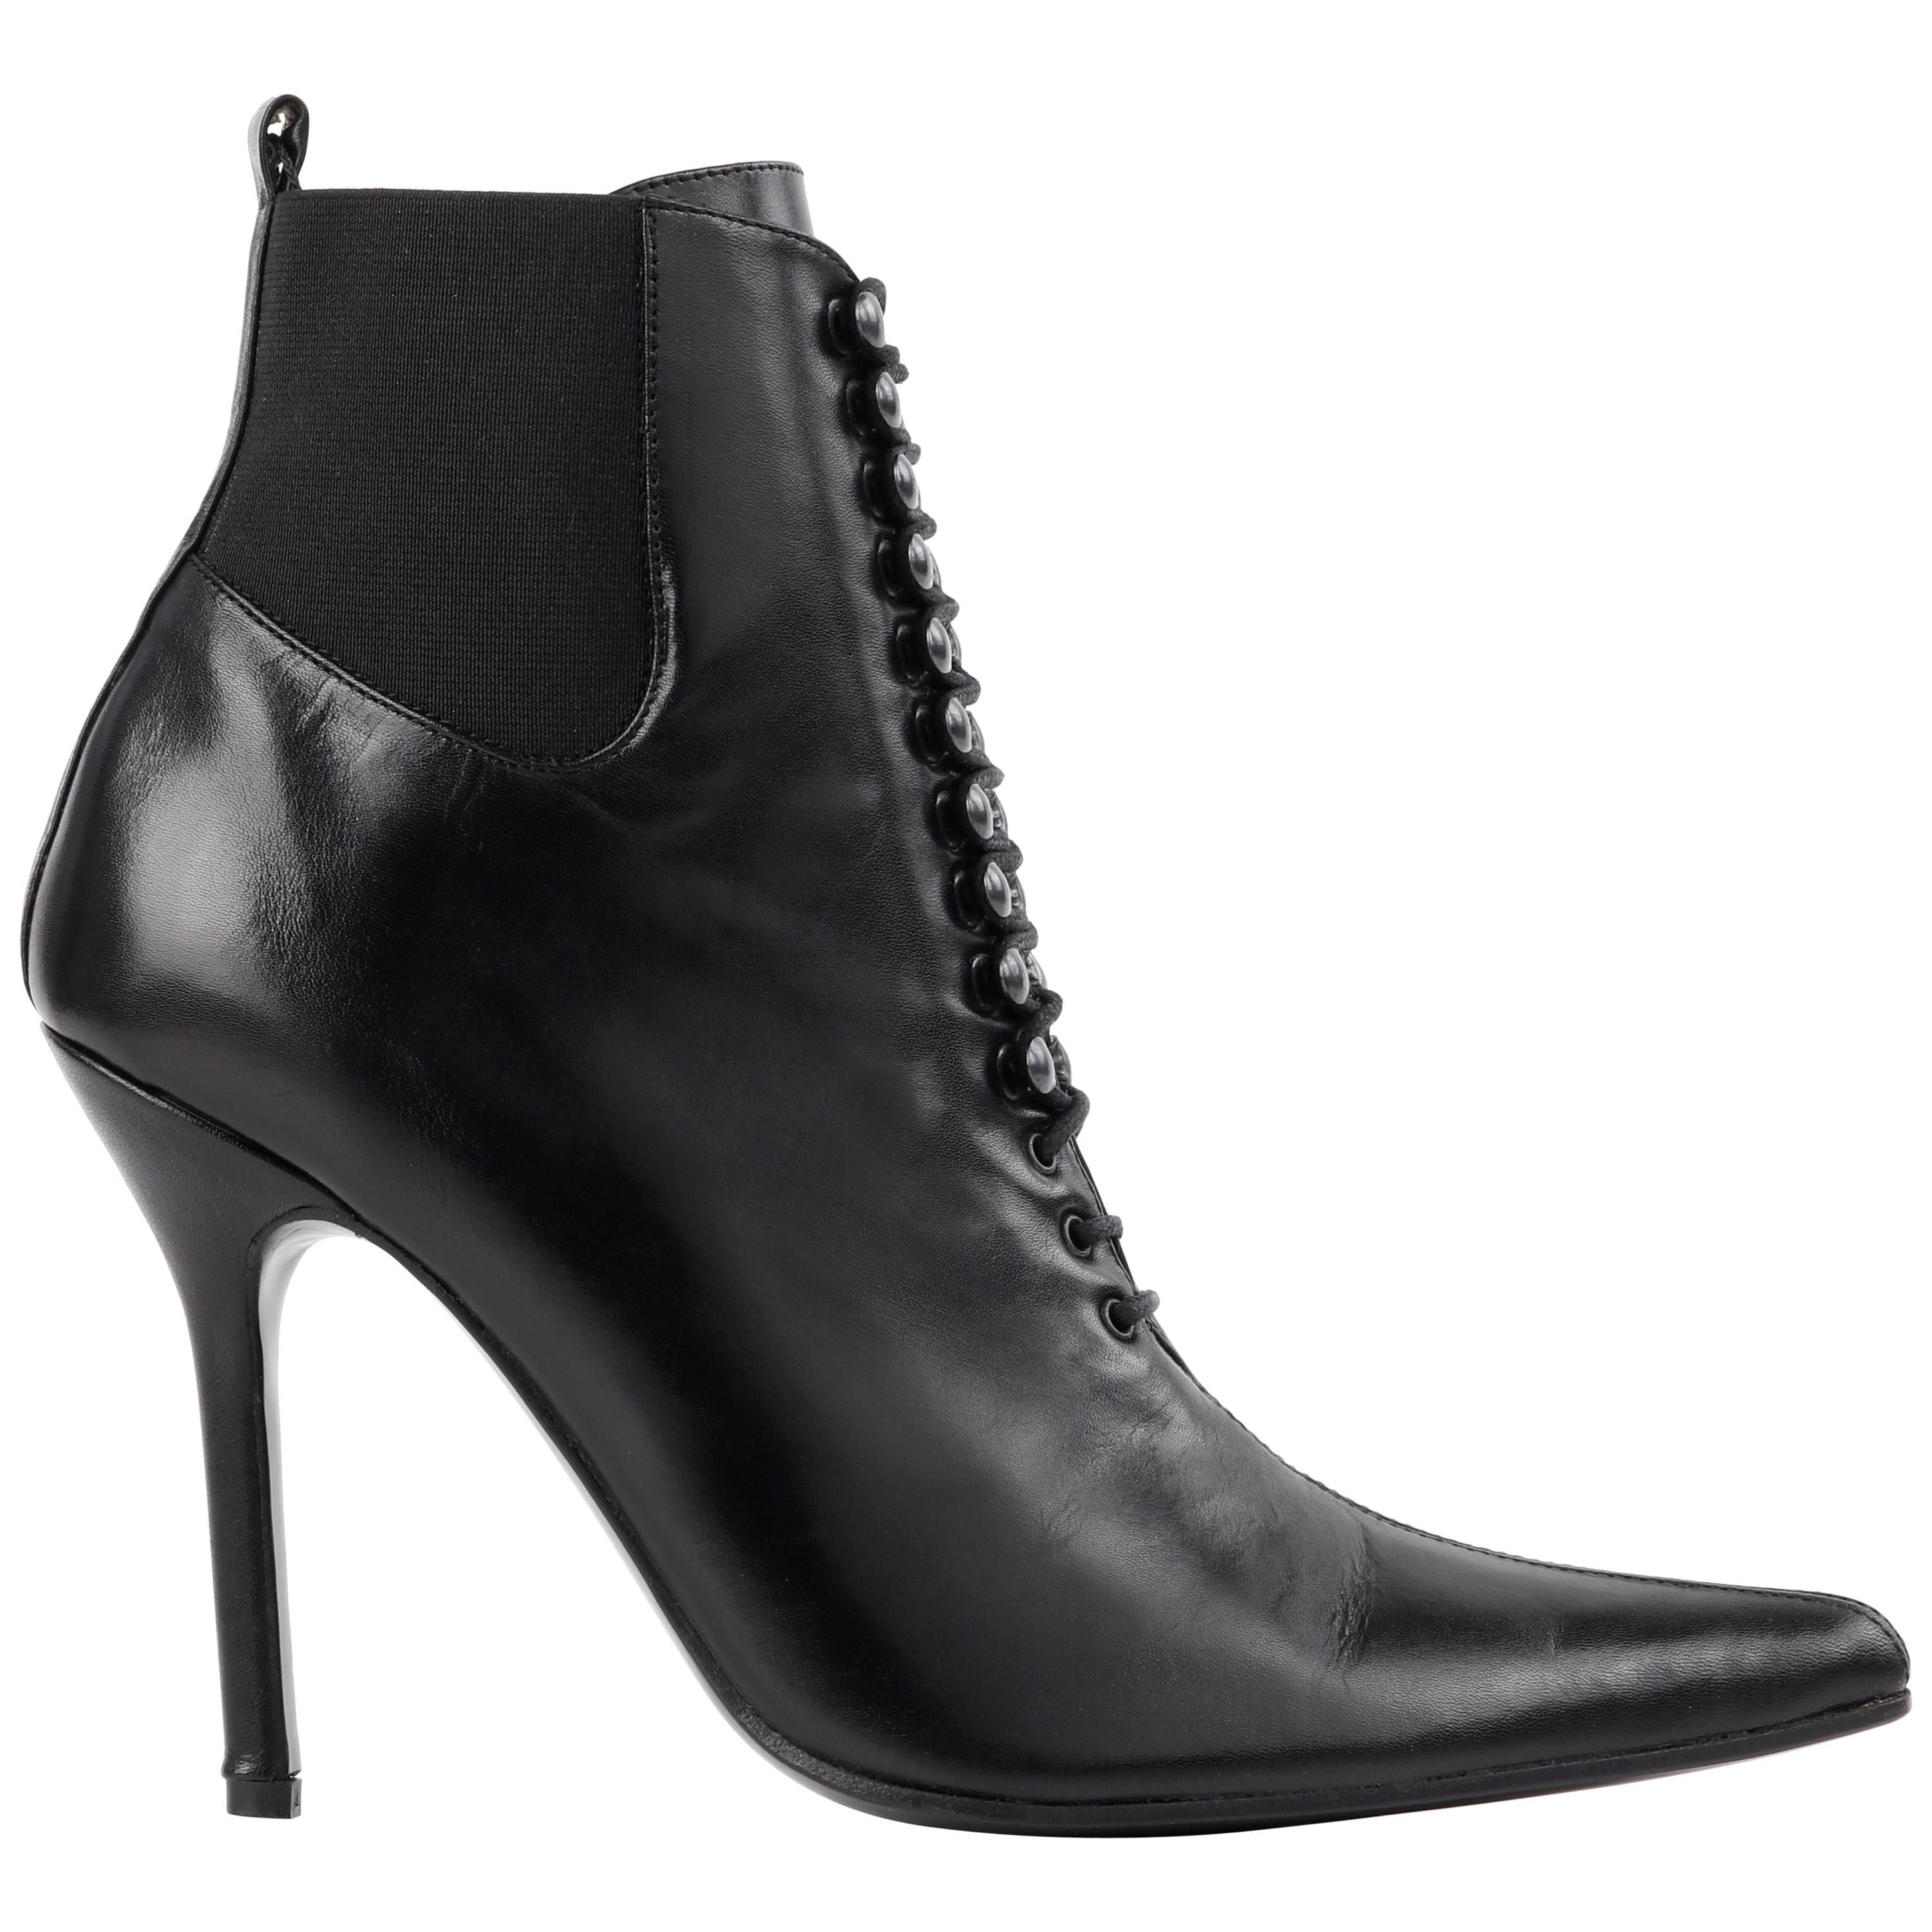 DOLCE & GABBANA “Tronchetto” Black Leather Lace Up Pointed Toe Booties Heels 